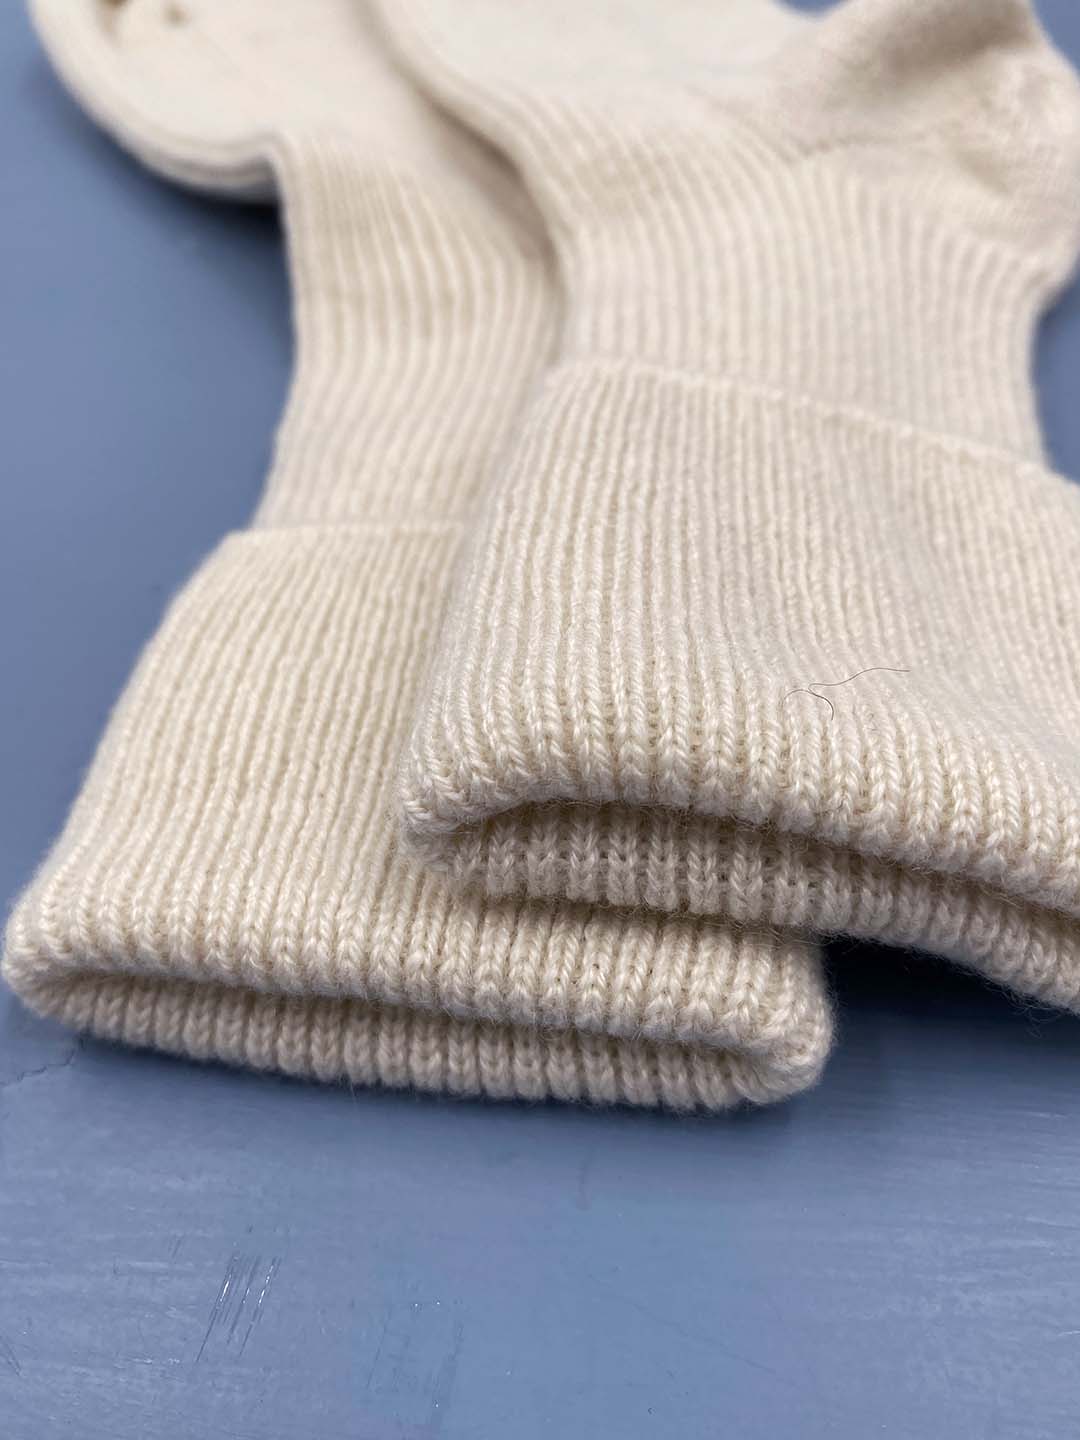 Cashmere bed socks in classic antique white shade designed and made in Scotland